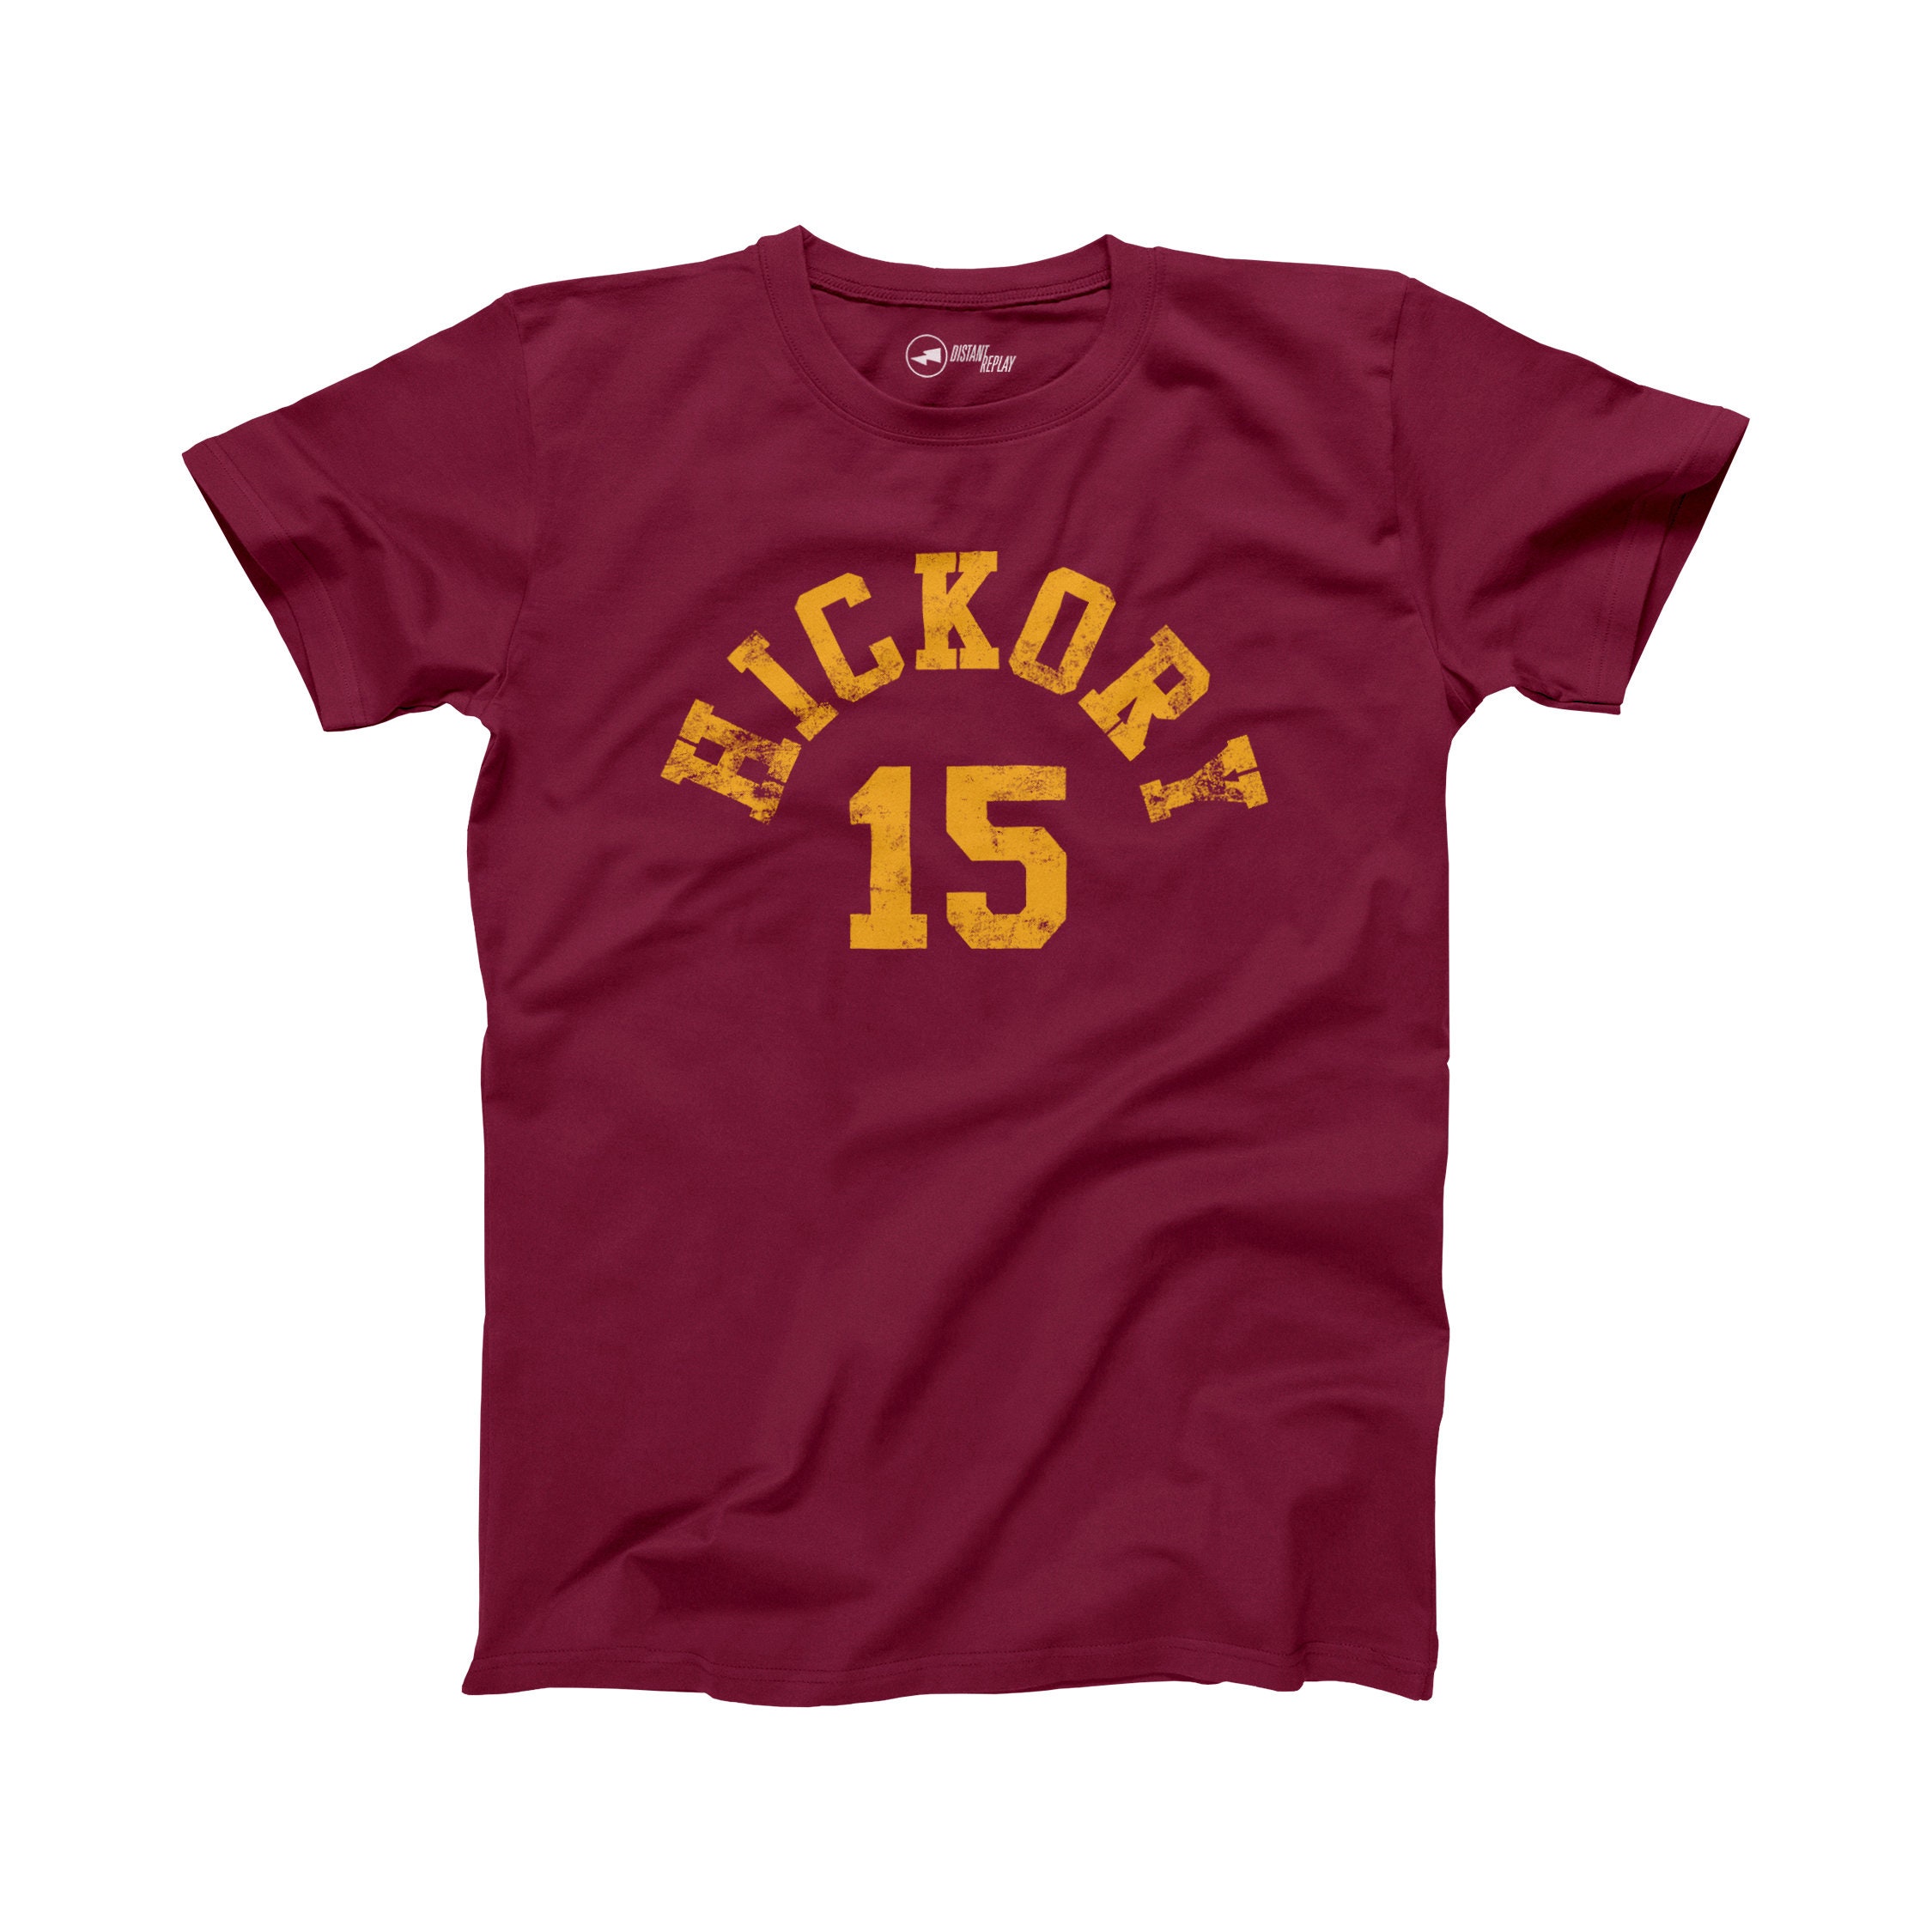 Indiana Pacers will wear Hickory HS jerseys from 'Hoosiers' in